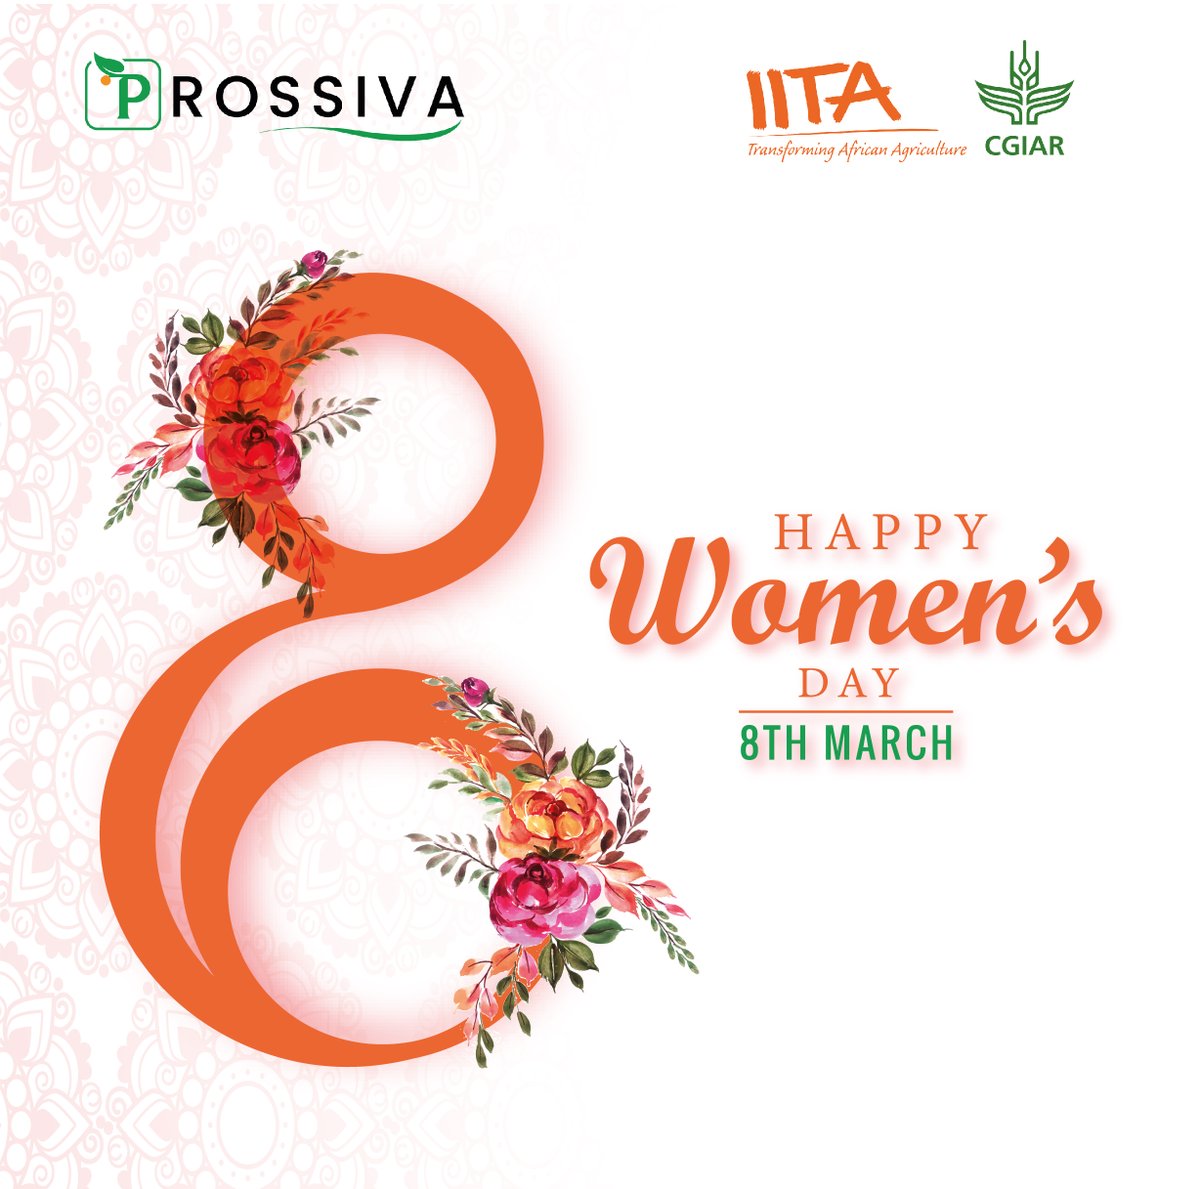 Happy #InternationalWomensDay!🌱Today, we celebrate the vital role of women in African agriculture & seed systems. From seed producers to researchers, their contributions are invaluable for sustainable food security. Let's empower and support women in agric! #IWD2024 #PROSSIVA'